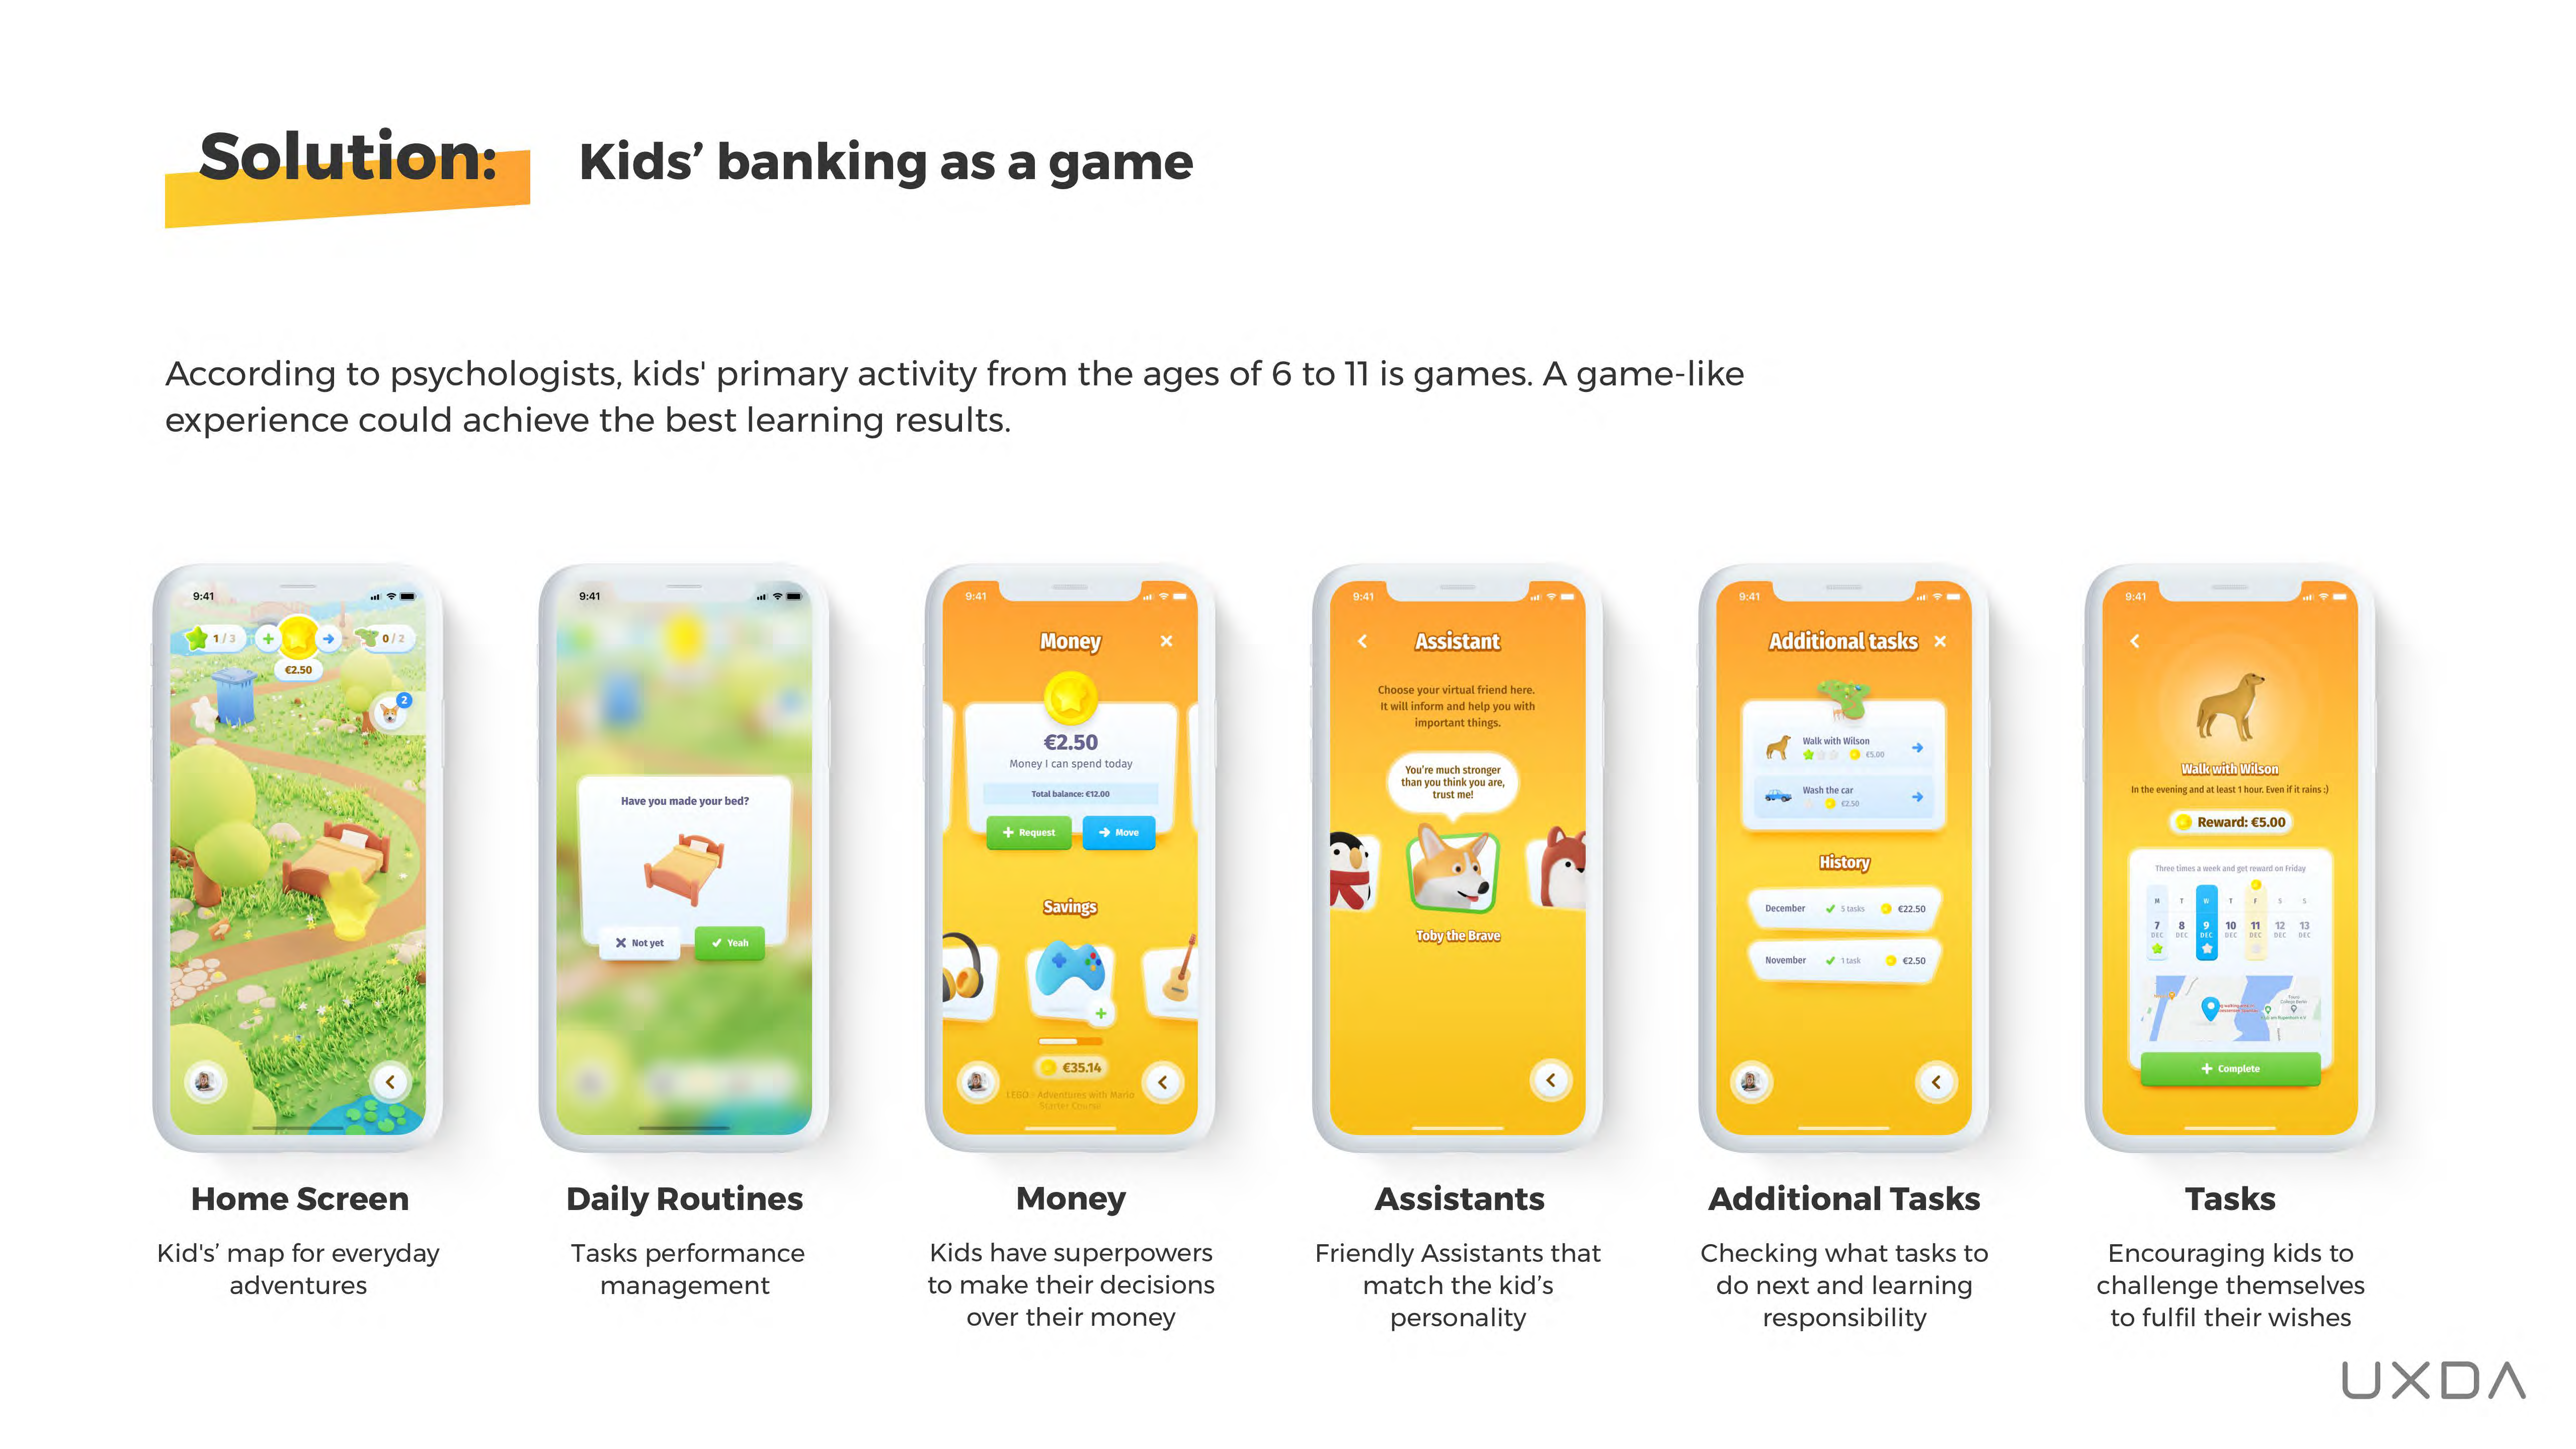 UXDA UX Design Kids Banking App Teach Save Money Future solution gamification elements